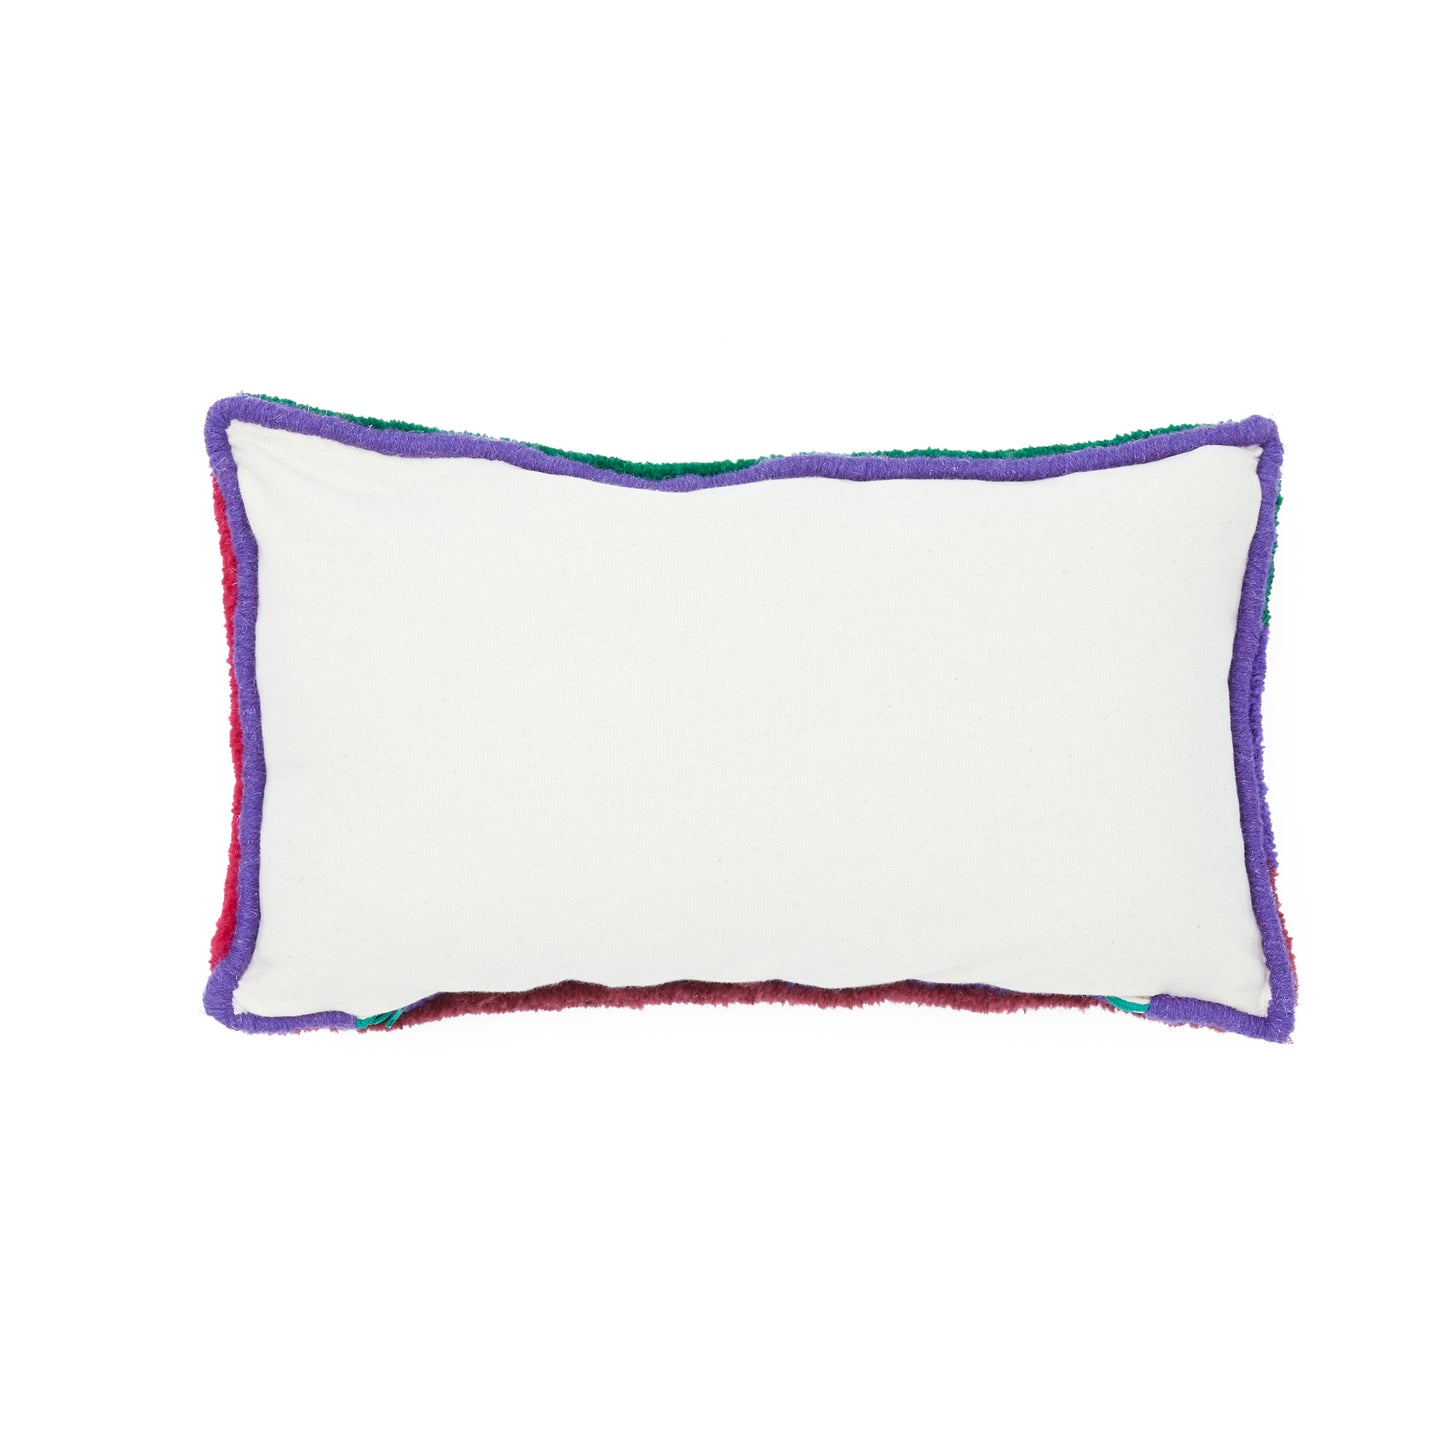 WATERMELON PURPLE, PINK AND GREEN TUFTED CUSHION